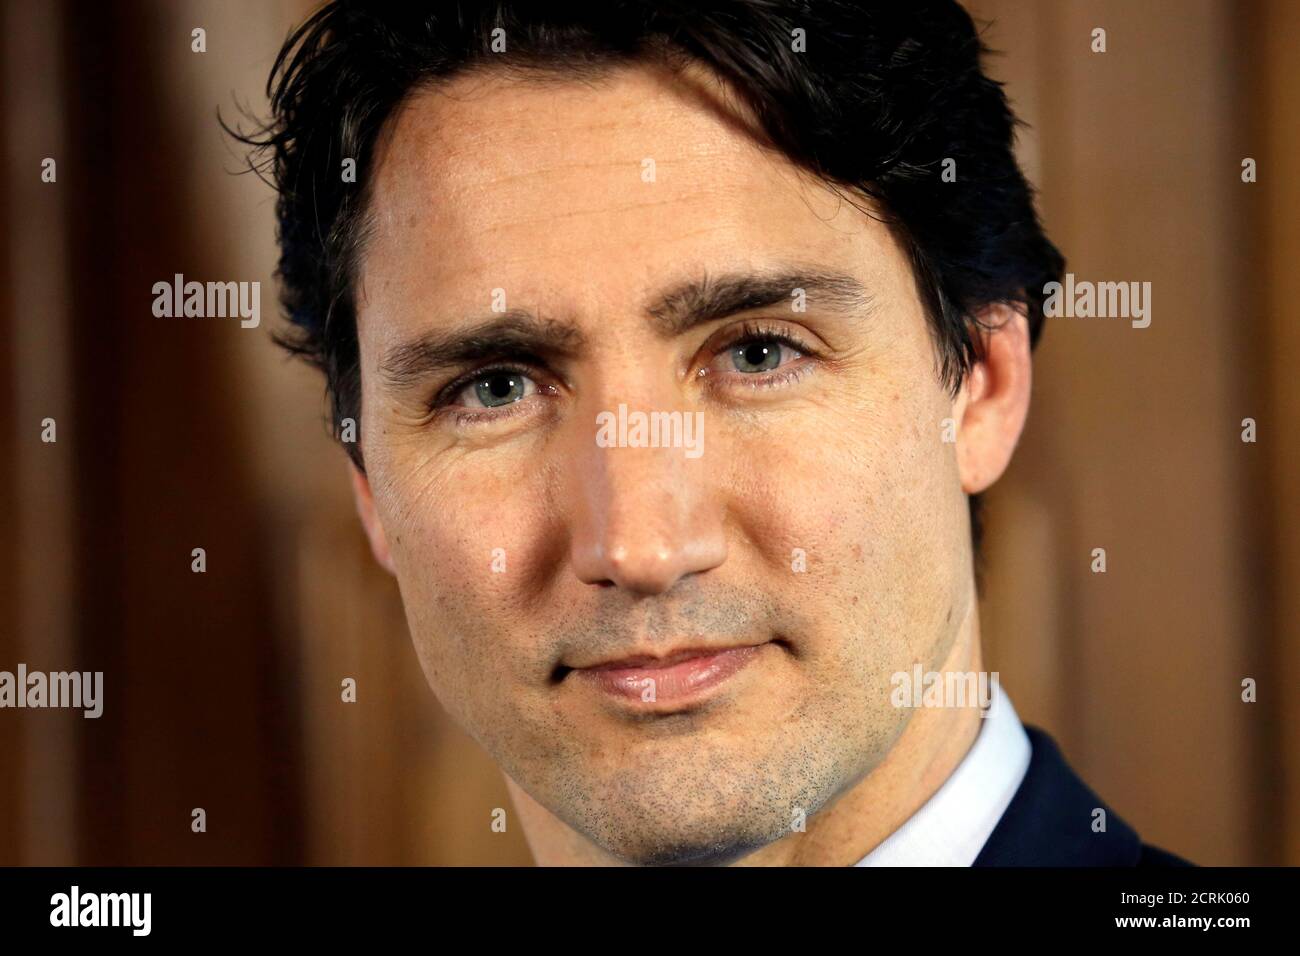 Canada's Prime Minister Justin Trudeau poses following an interview with Reuters in his office on Parliament Hill in Ottawa, Ontario, Canada, May 19, 2016. REUTERS/Chris Wattie Stock Photo